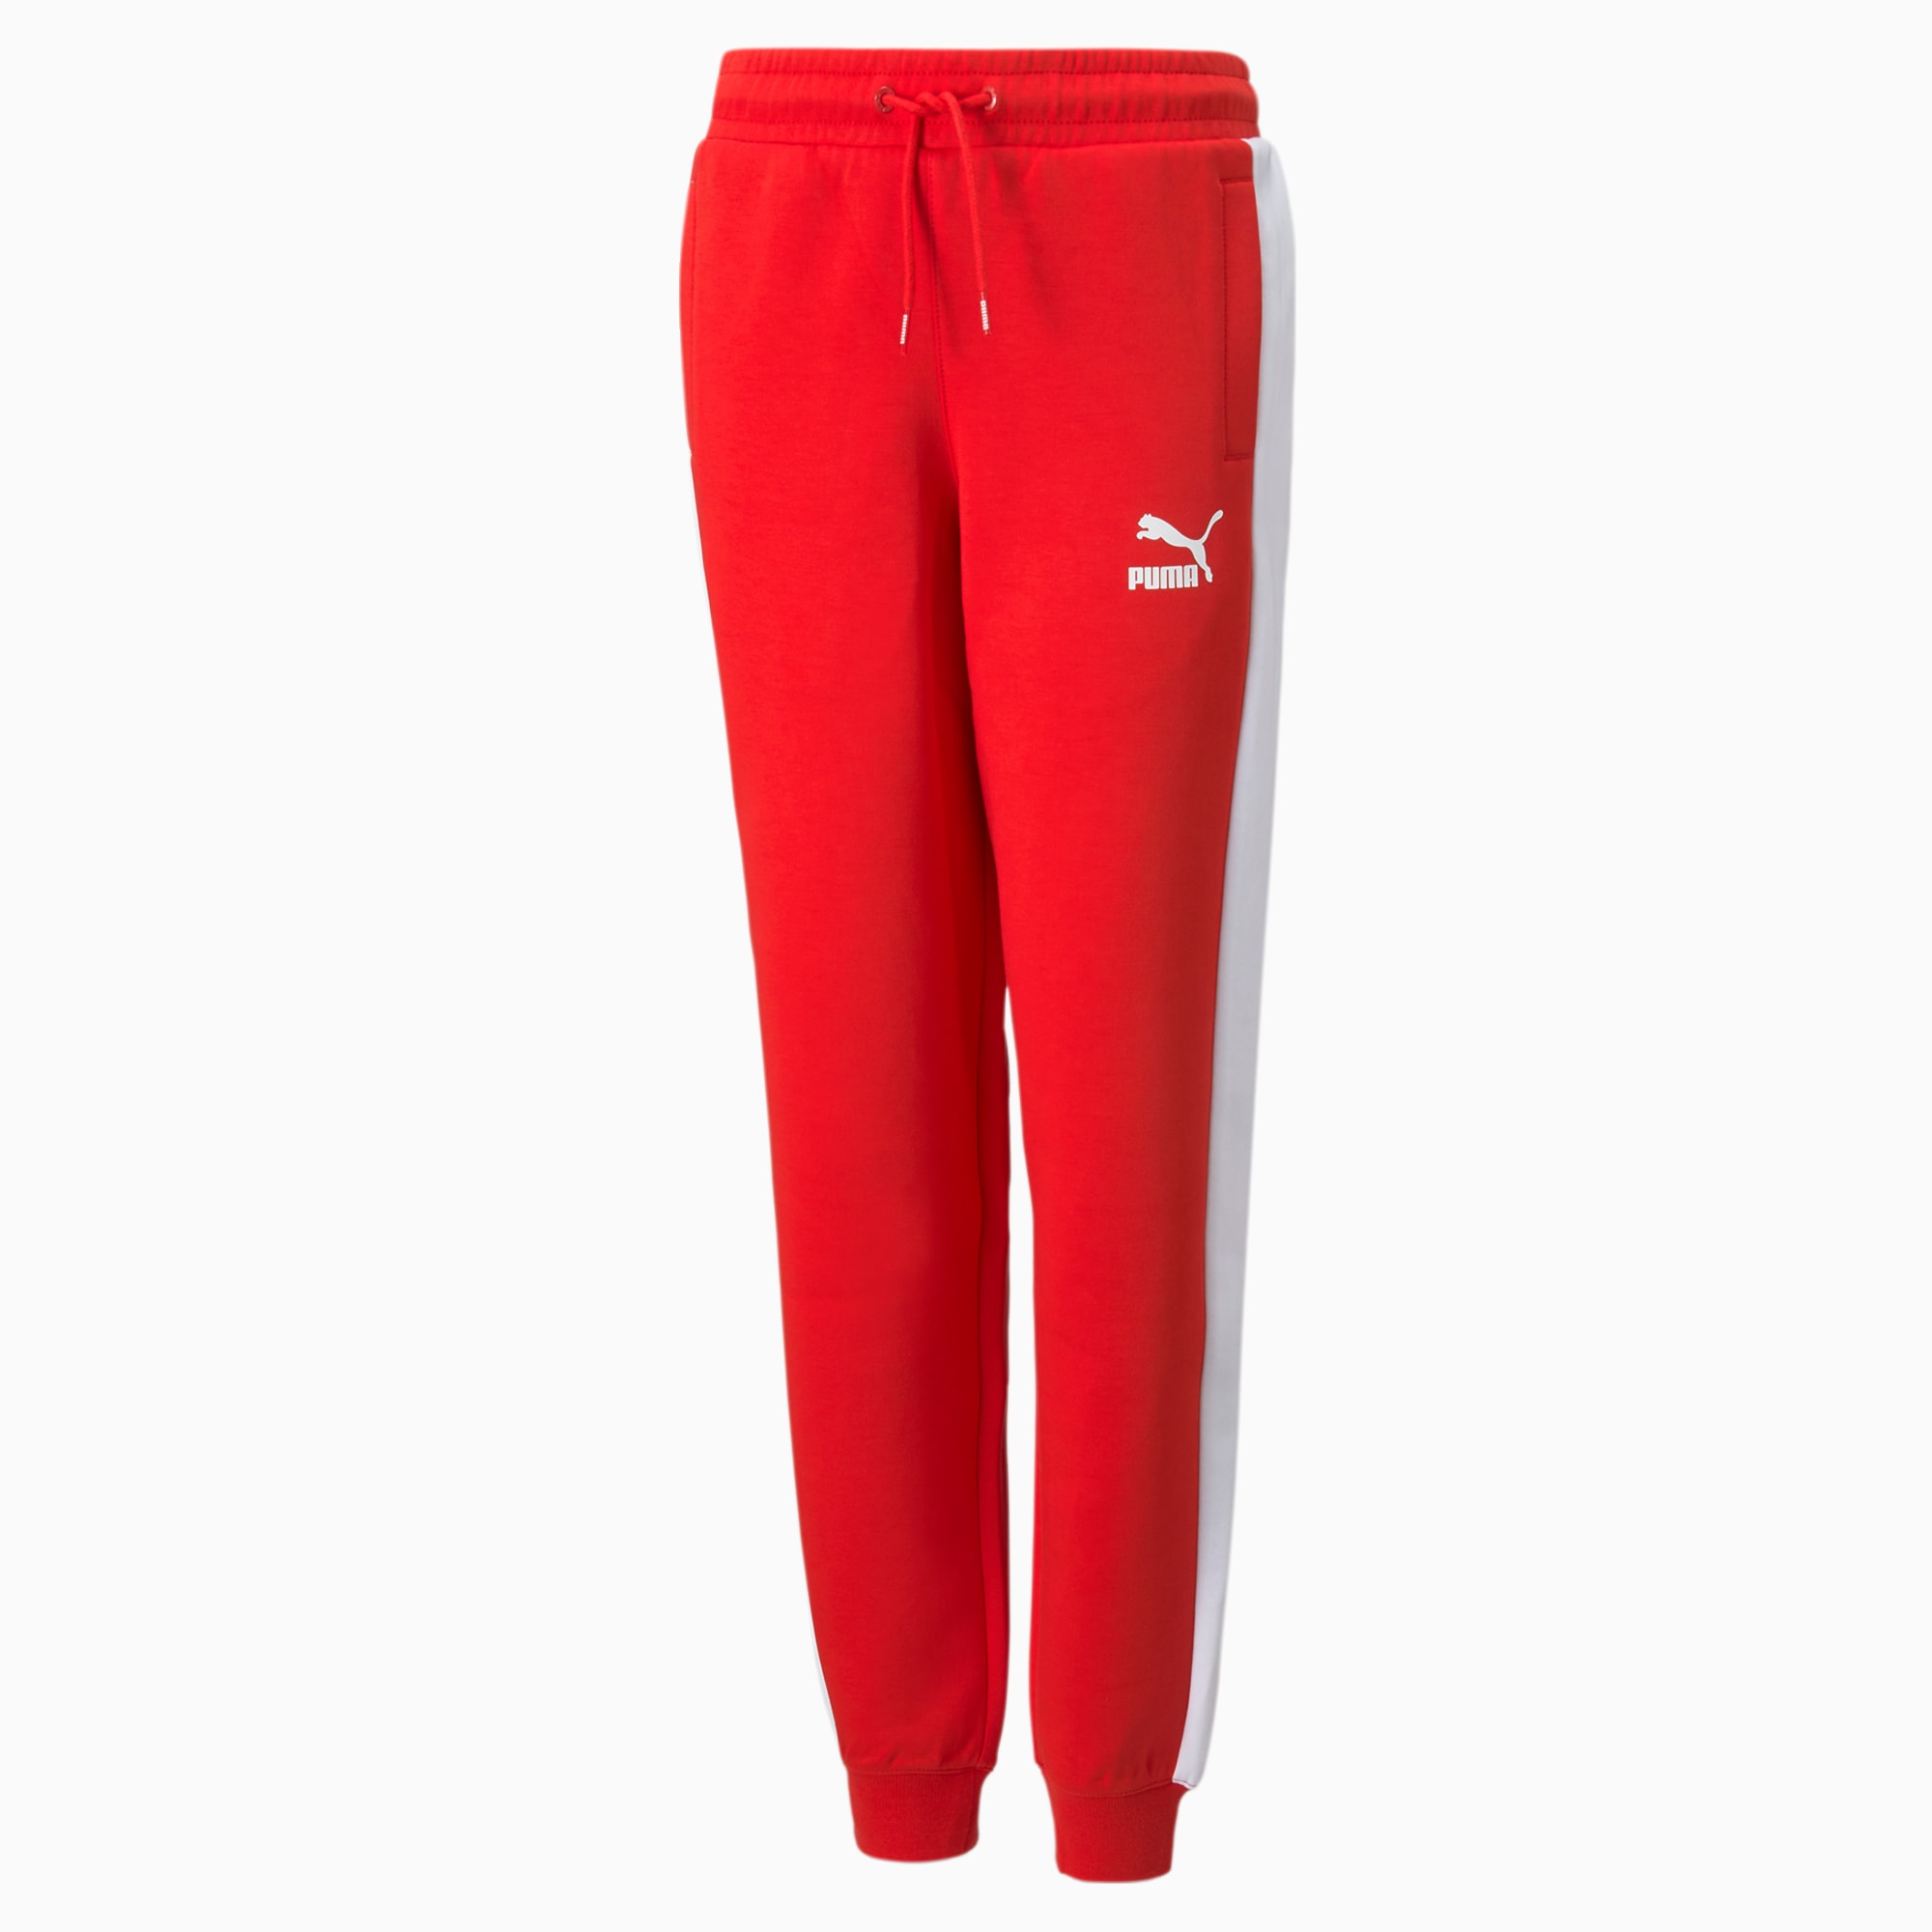 Iconic T7 Youth Track Pants